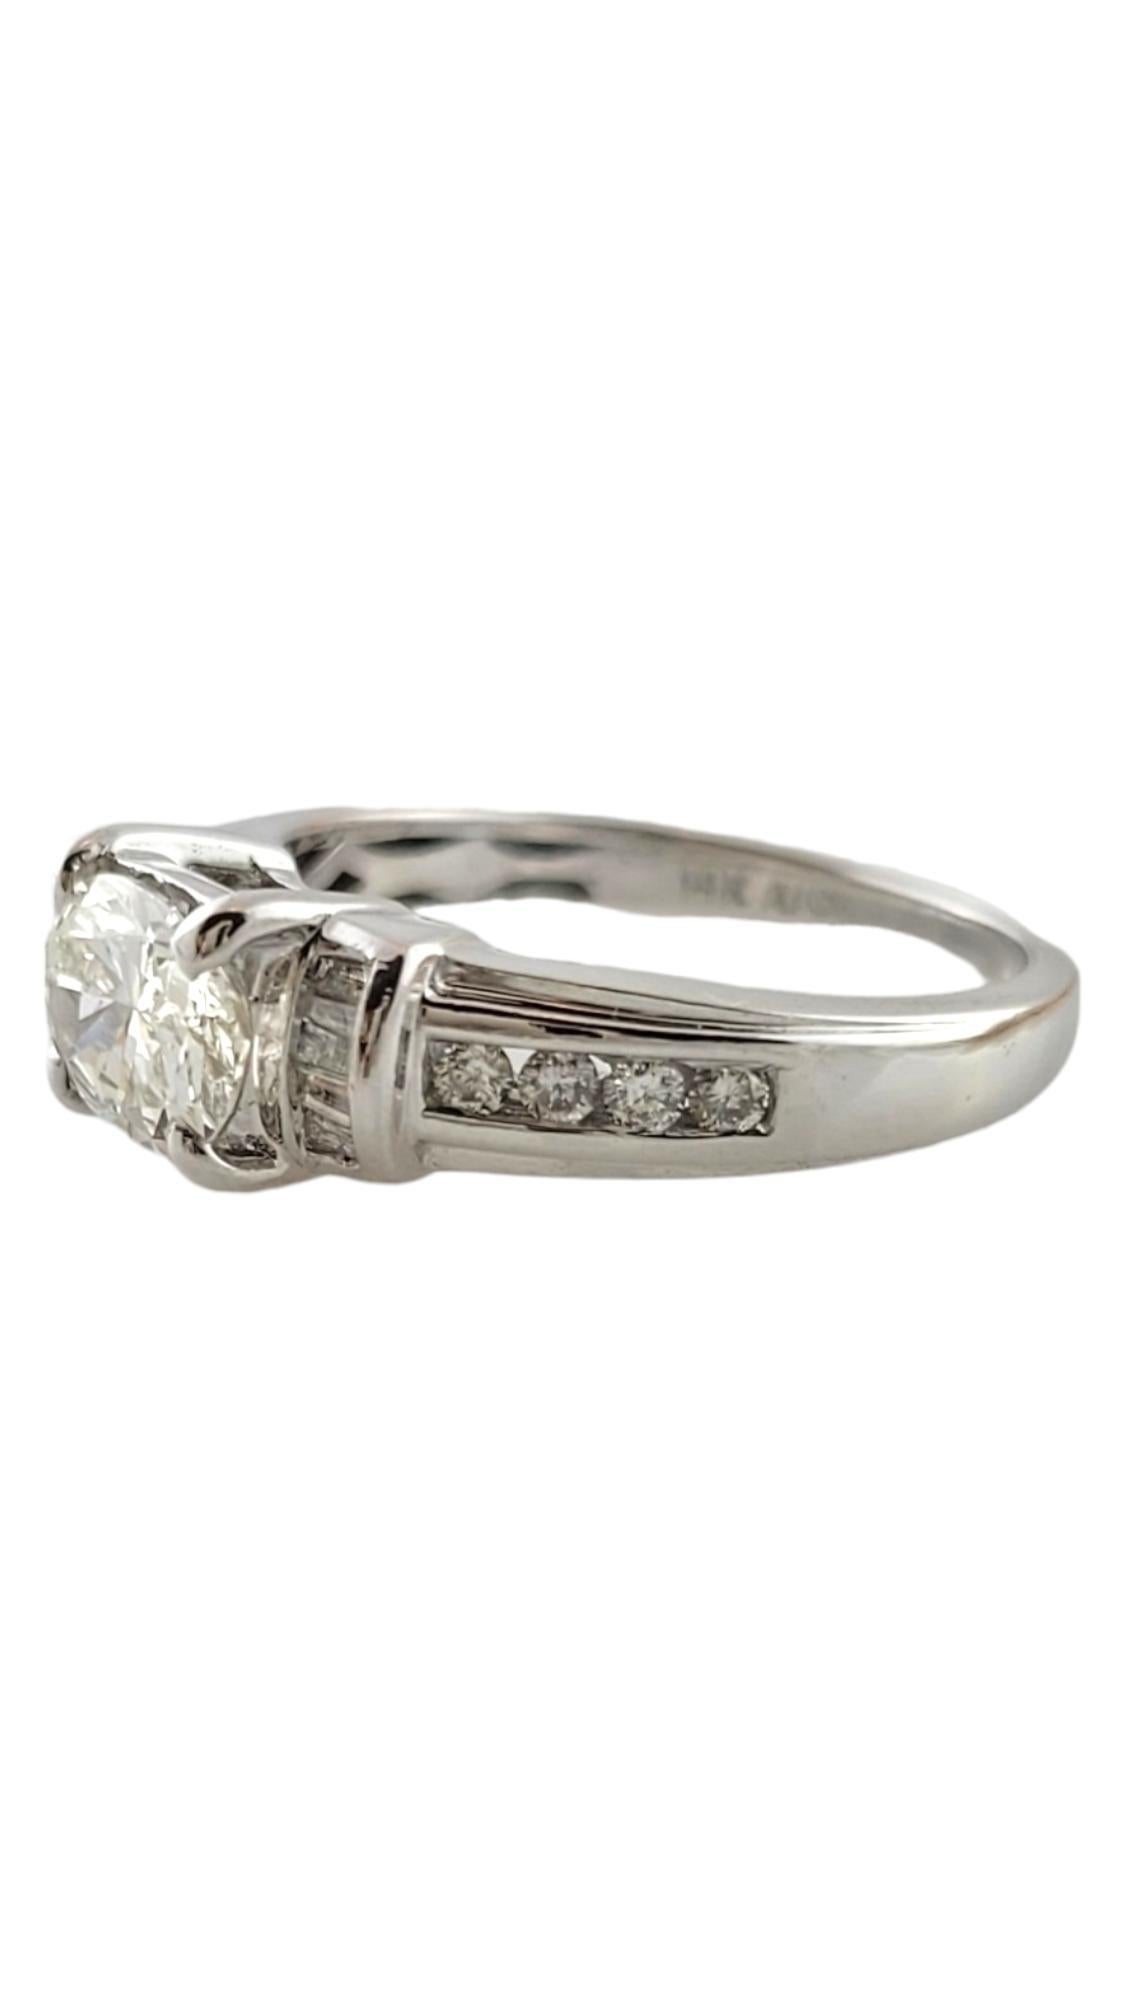 This sparkling engagement ring features one oval shaped diamond (1.0 ct.) accented with eight round brilliant cut diamonds and 10 baguette cut diamonds set in classic 14K white gold.  

Width:  6 mm.  Shank:  1.5 mm.

Total diamond weight:  1.25